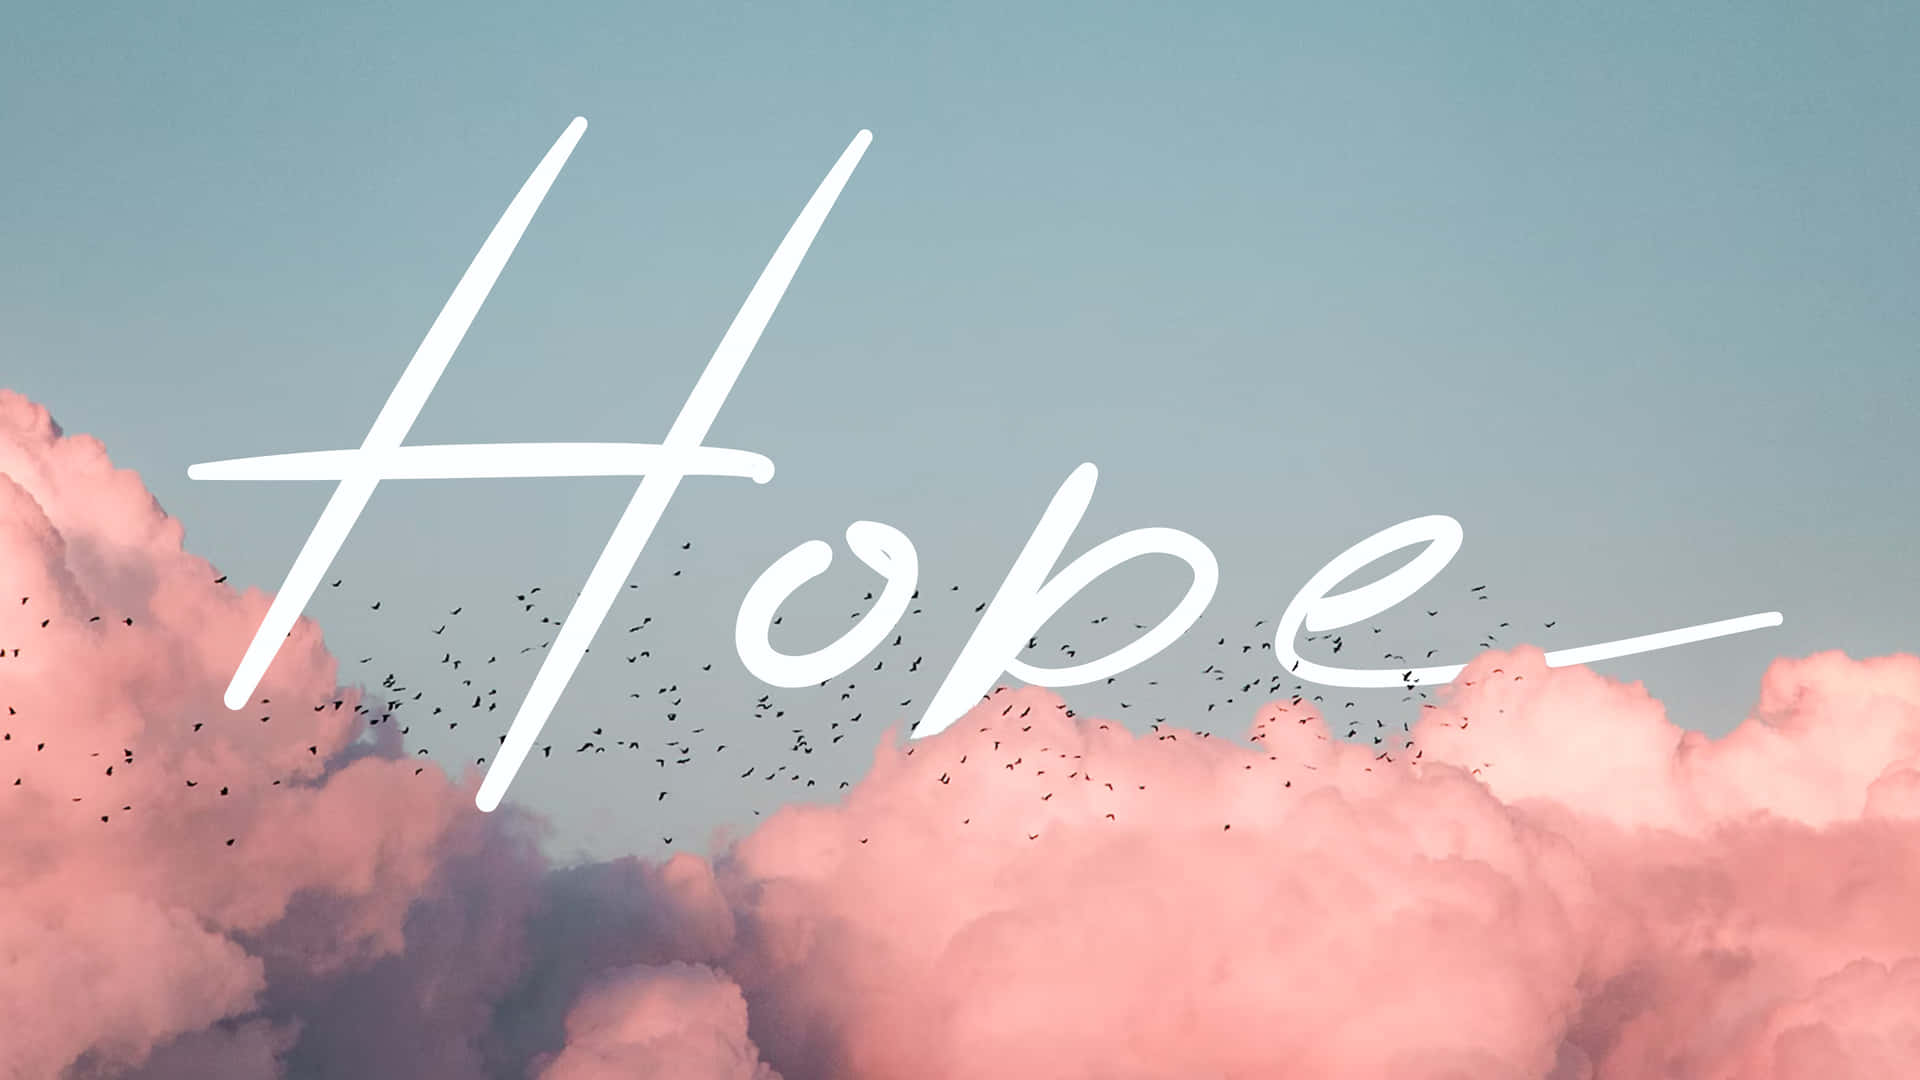 Free Hope Background Photos, [100+] Hope Background for FREE | Wallpapers .com